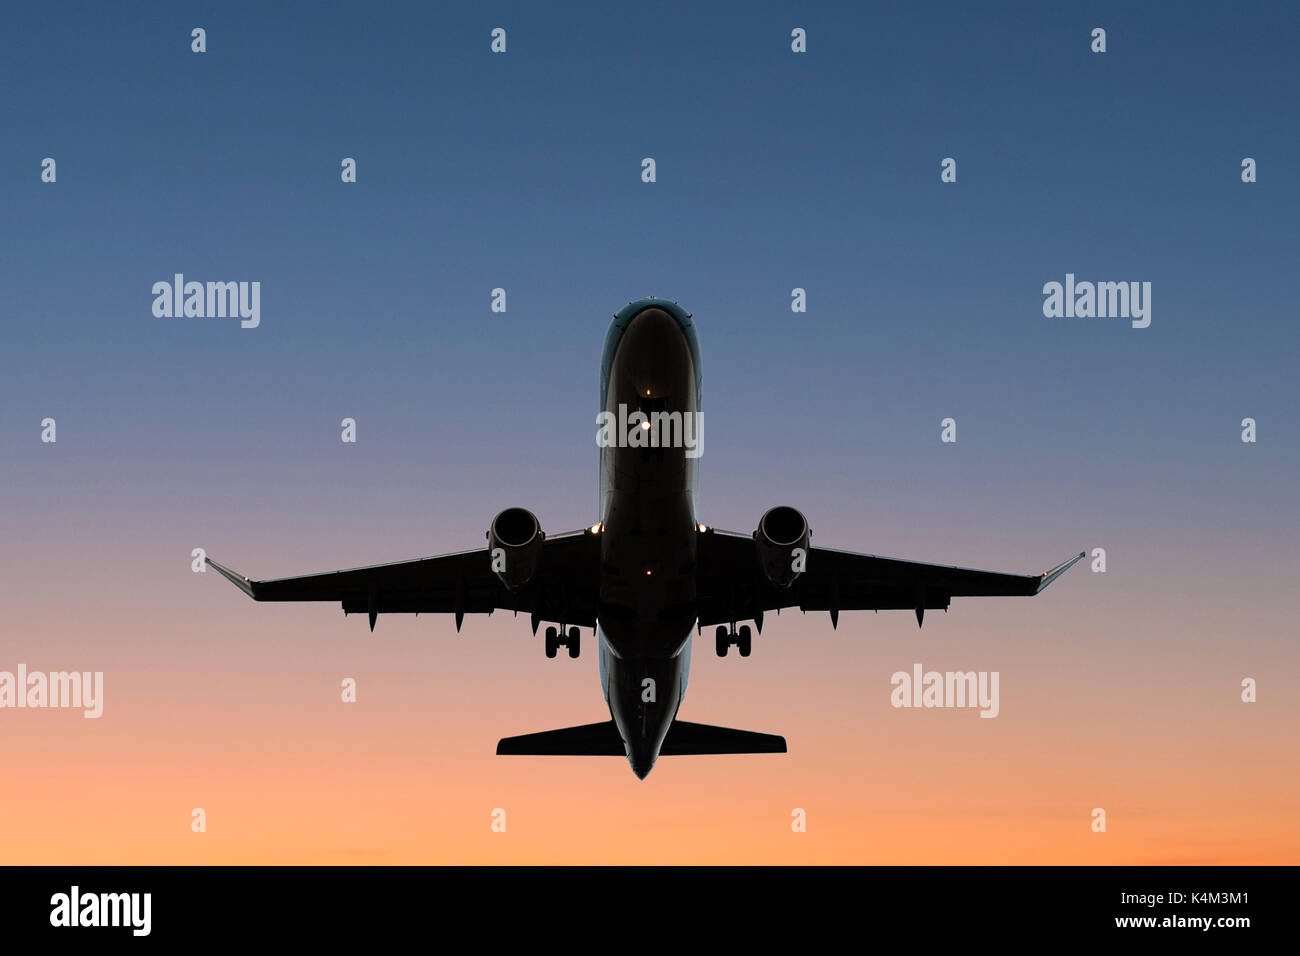 airplane on sunset sky - aircraft silhouette scenic sky Stock Photo